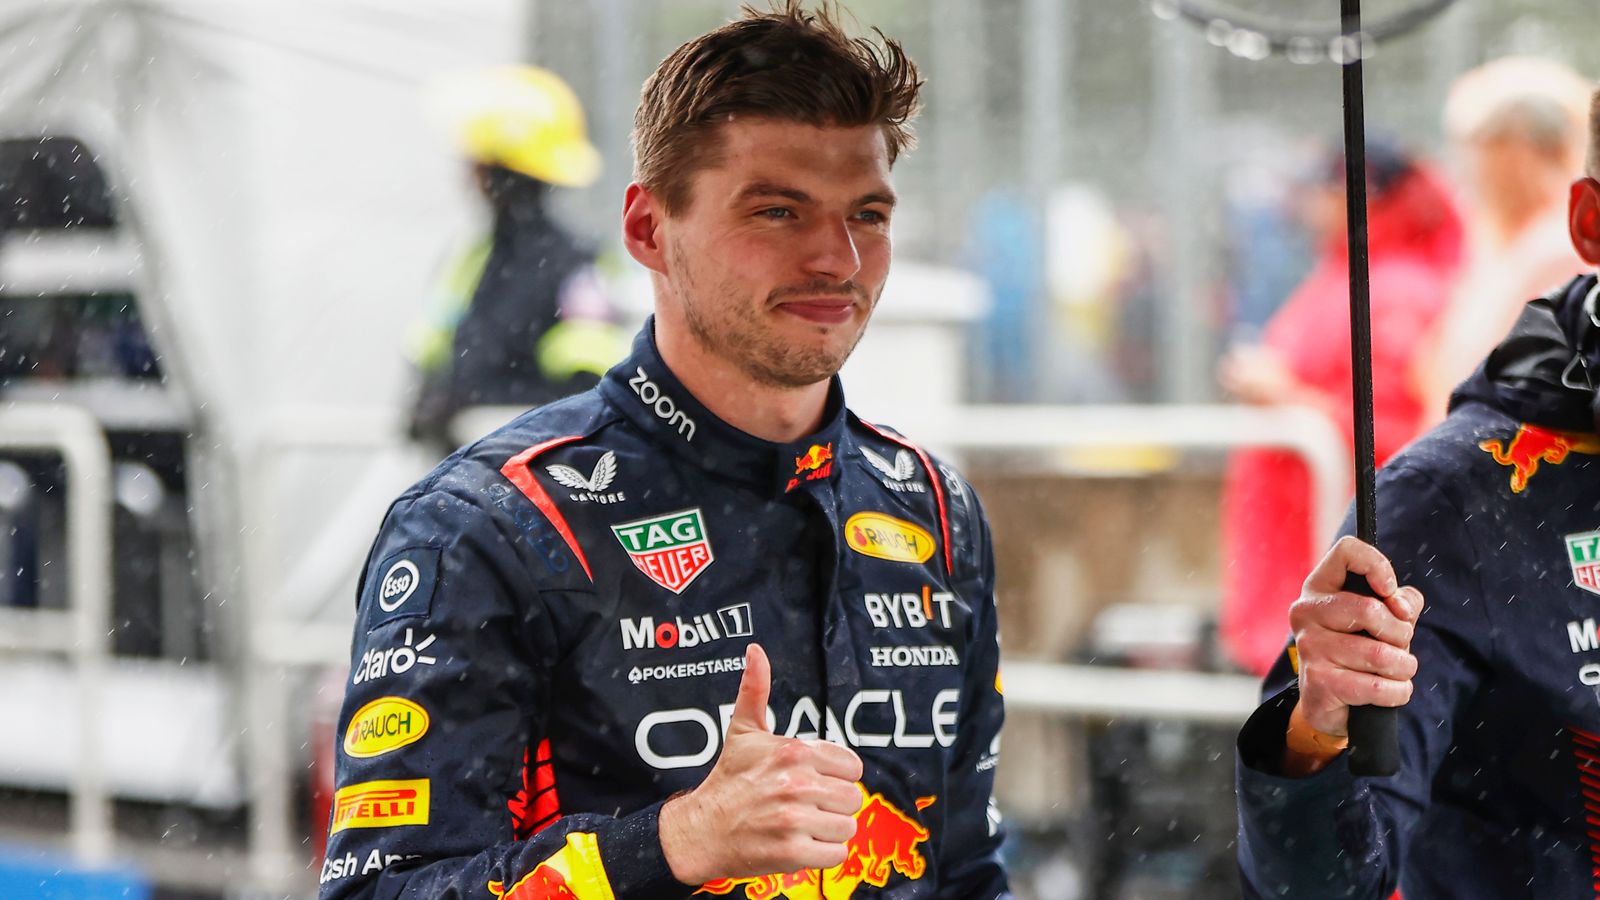 Canadian GP Qualifying: Max Verstappen on pole ahead of Fernando Alonso as Nico Hulkenberg gets grid penalty